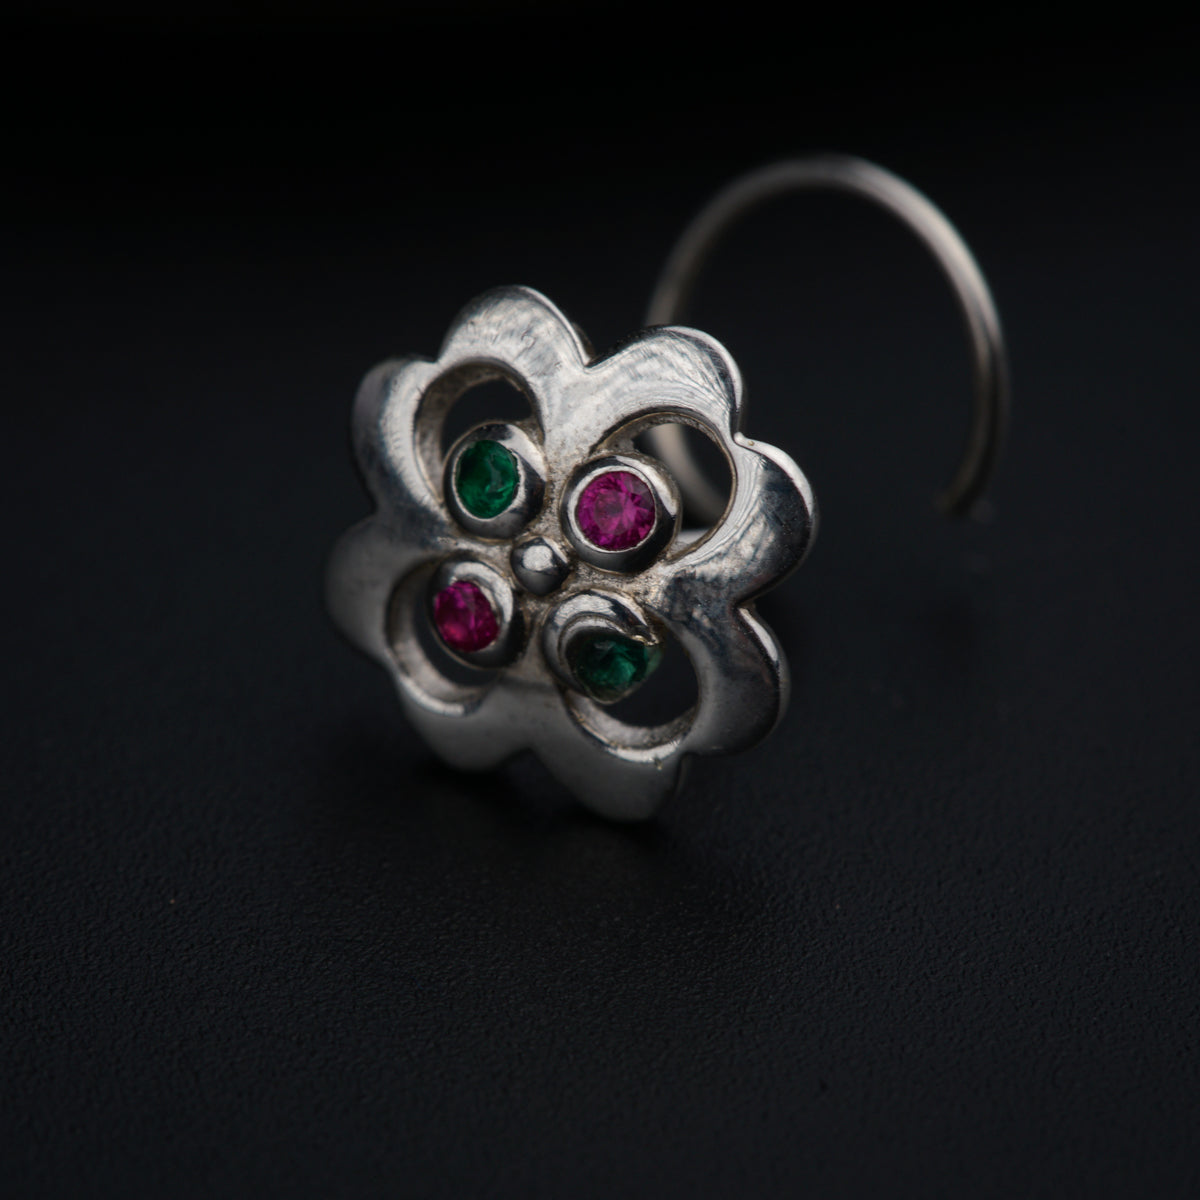 a close up of a flower shaped ring on a black surface